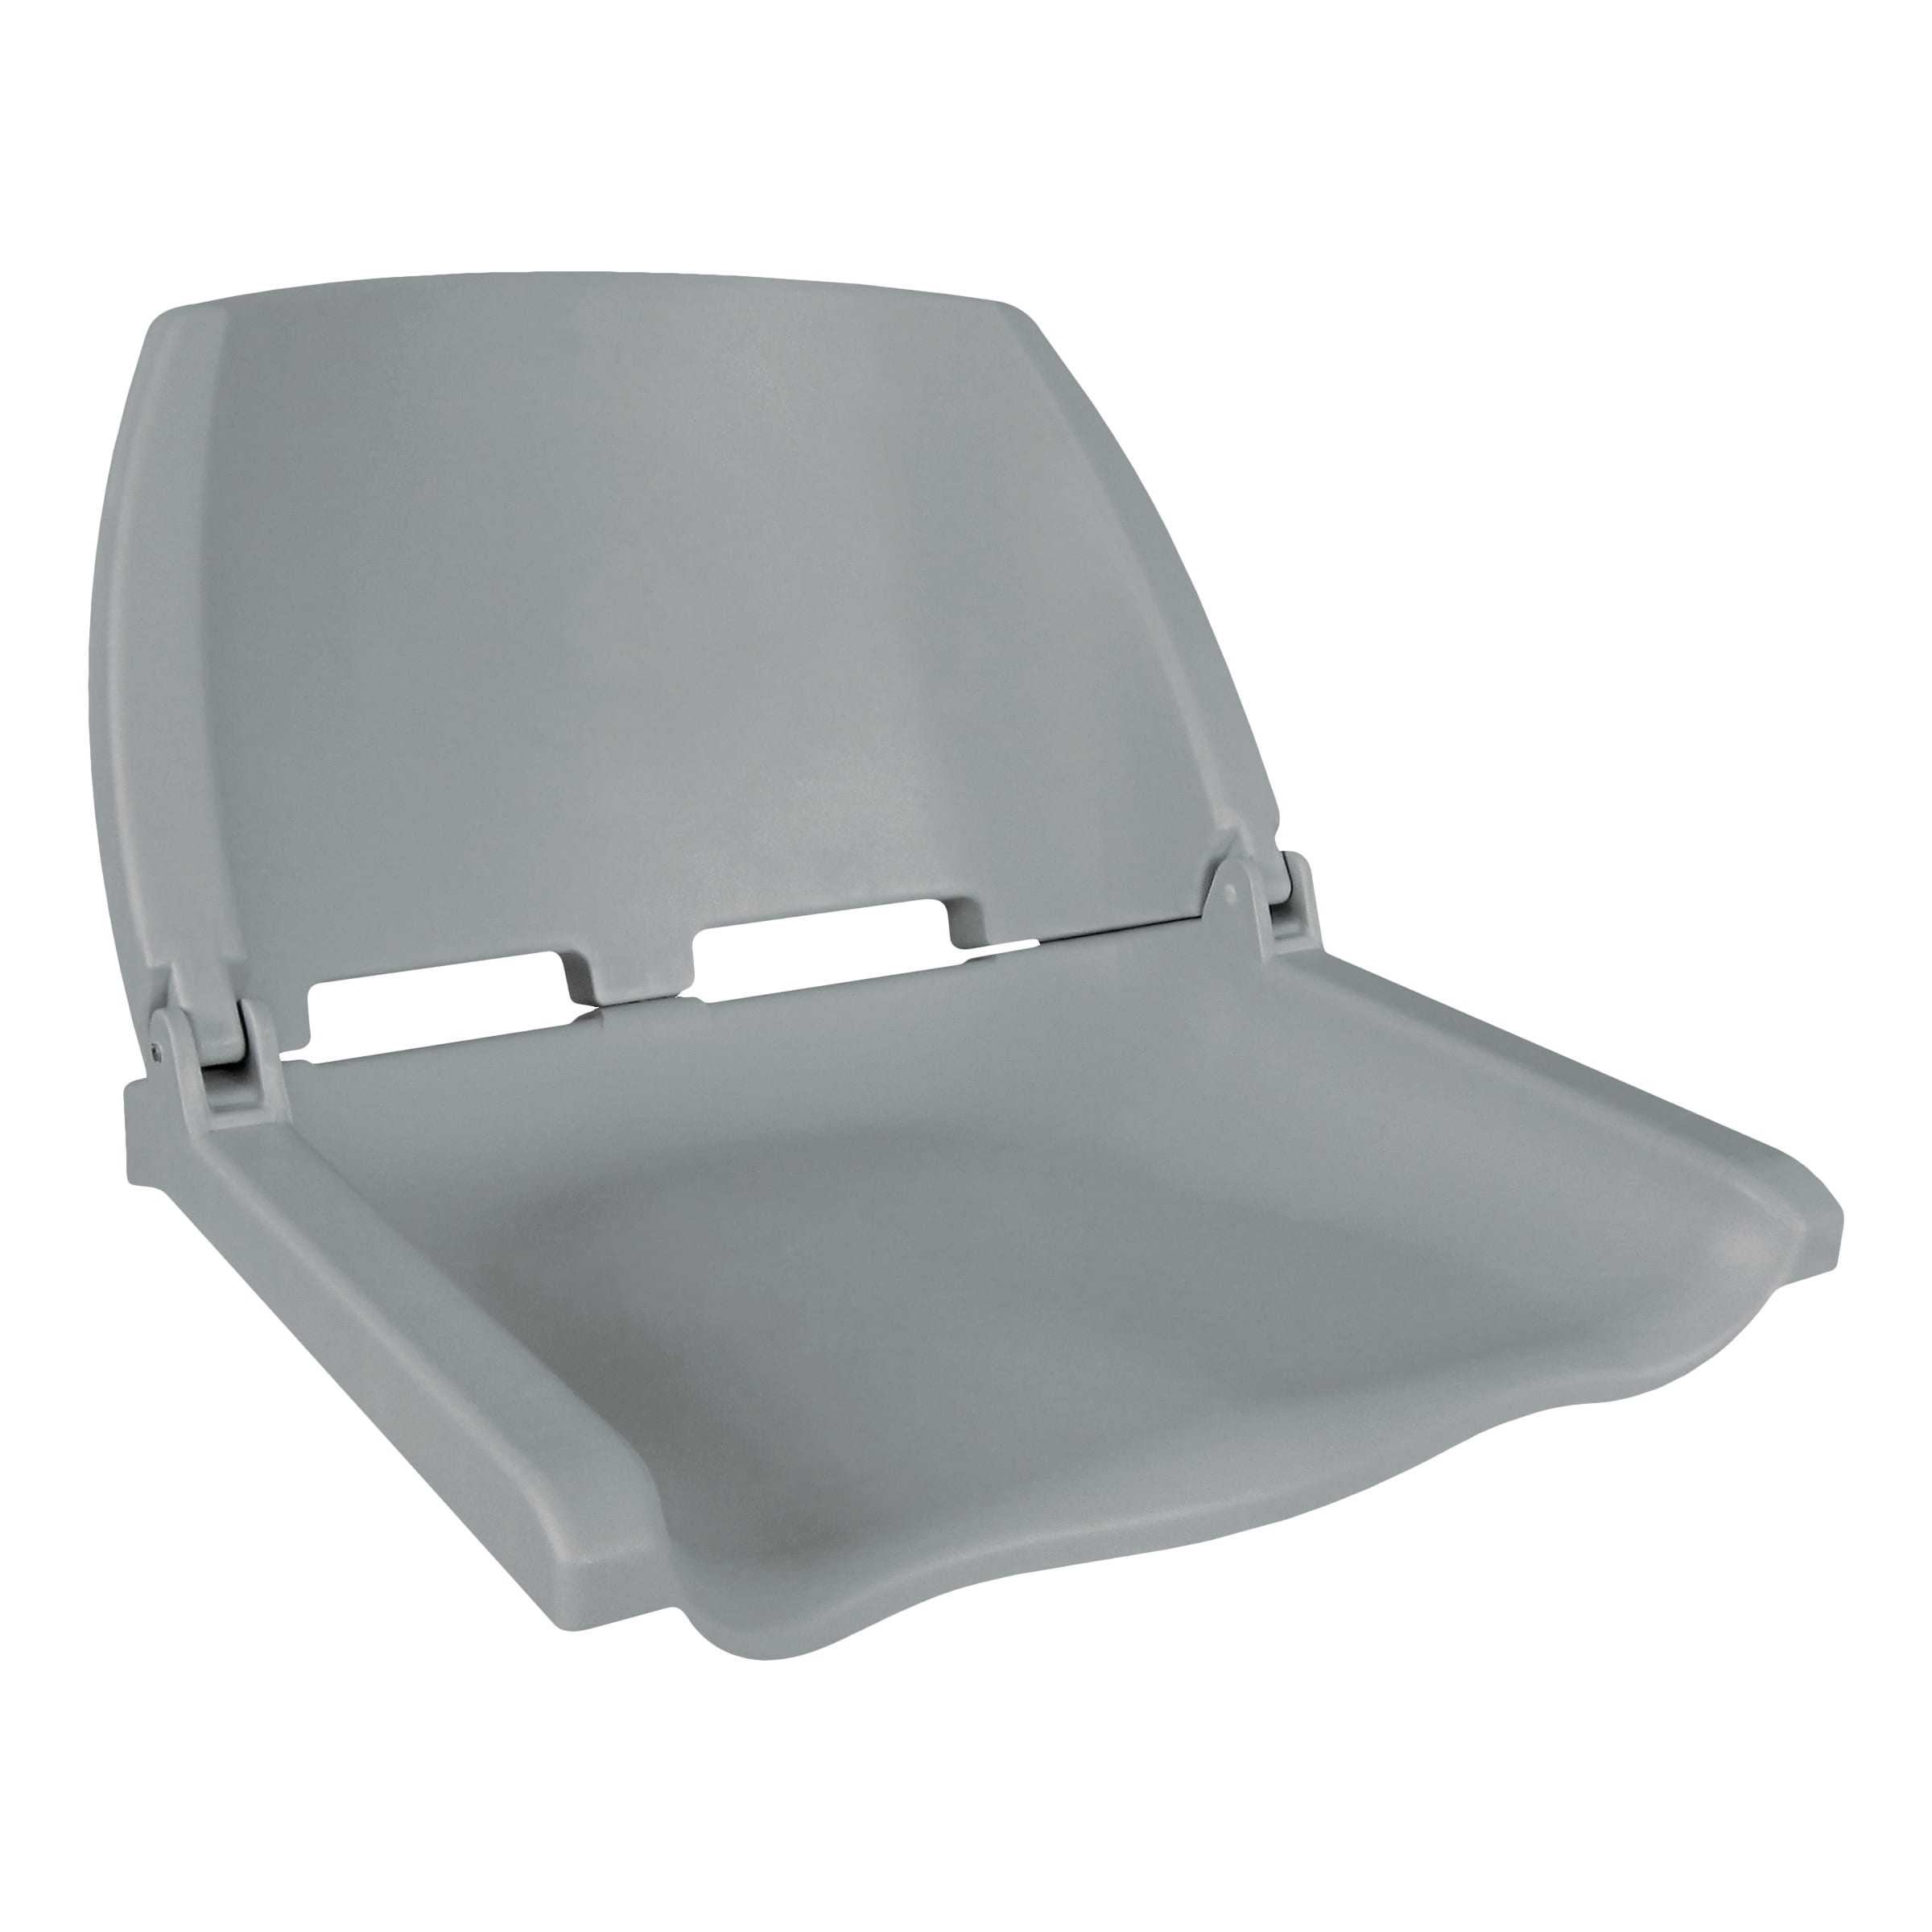 Helm seat - 60195 - Tempress - for sport fishing boats / fold-down /  1-person